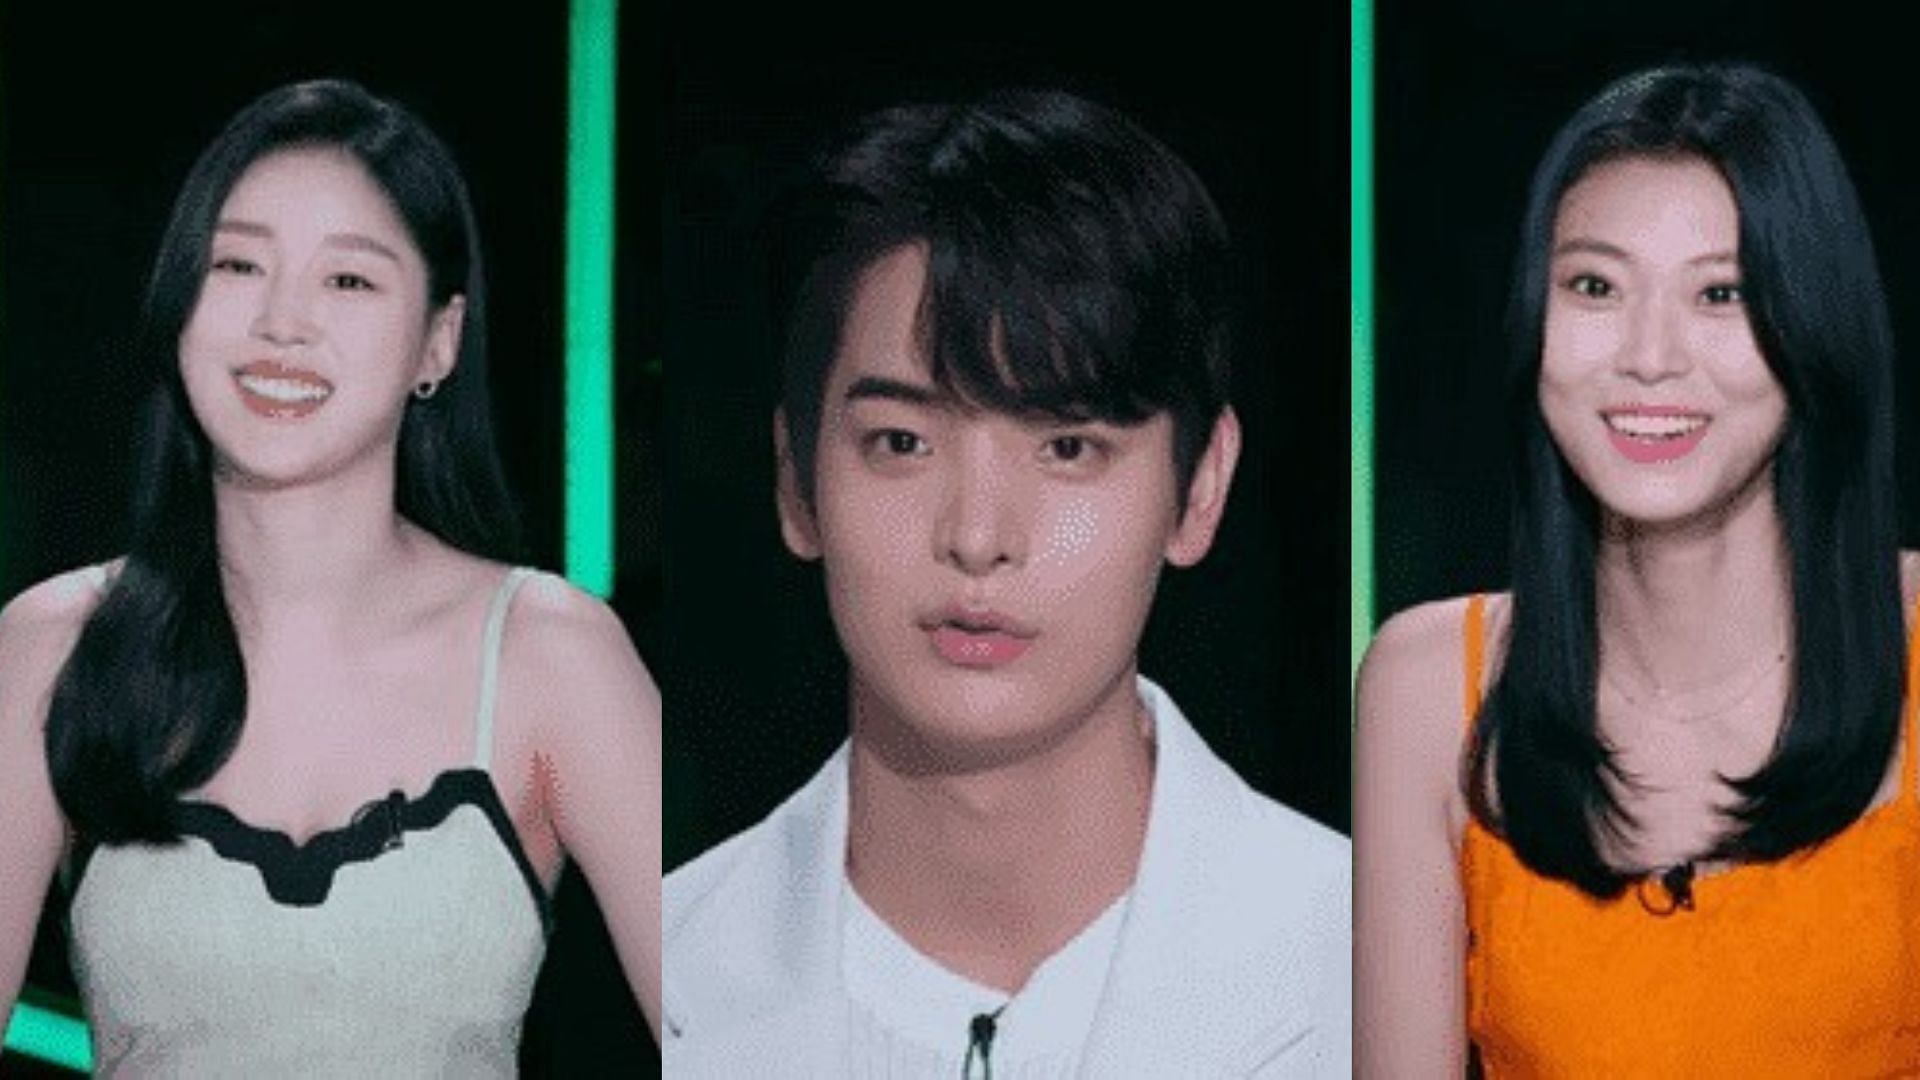 Single's Inferno”: Get To Know The Cast of Korea's Hottest New